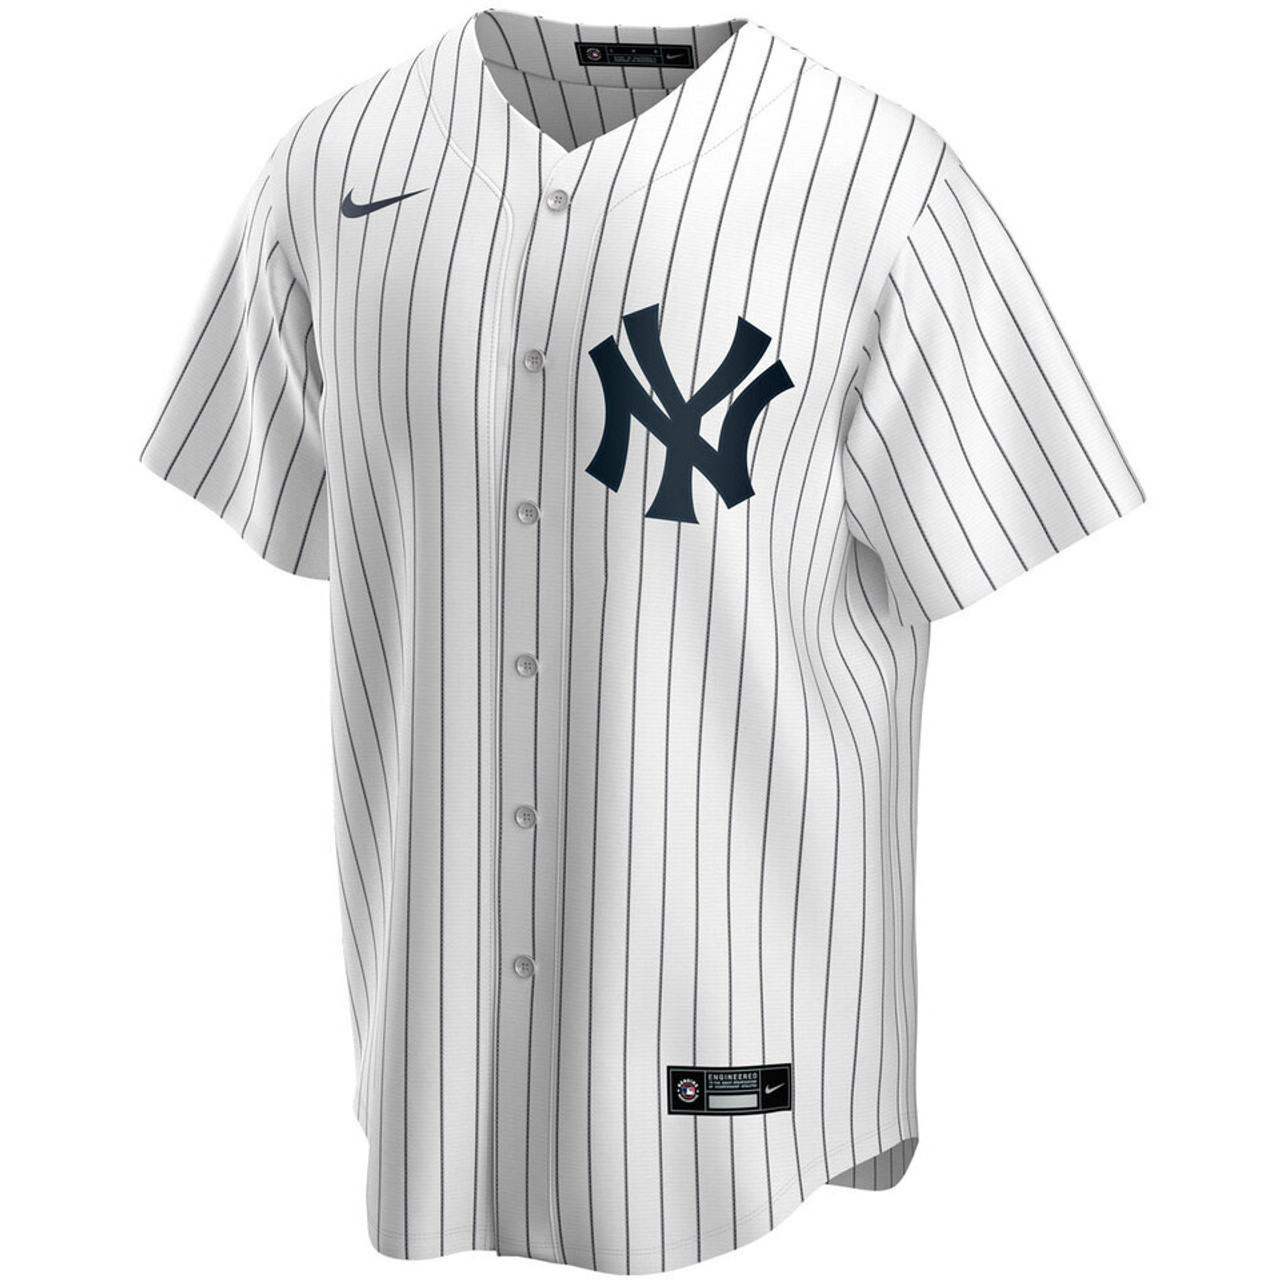 New York Yankees Women's PLUS SIZE Replica Jersey by Majestic Athletic